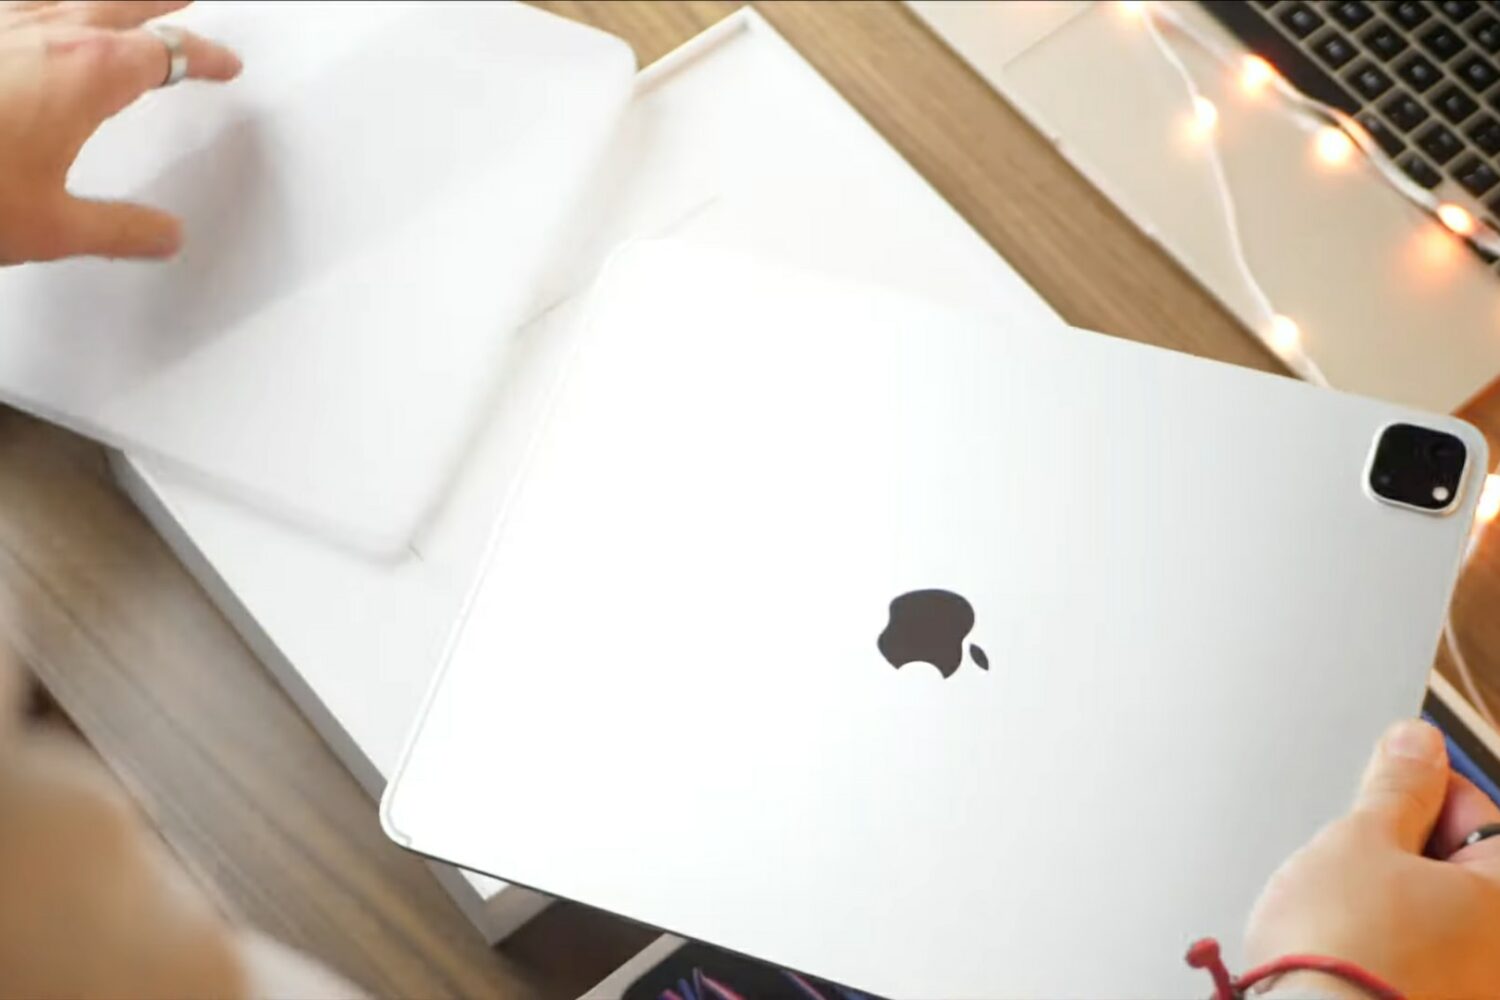 A young male's hands above a wooden desk taking the plastic wrapping off a brand new 12.9-inch iPad Pro